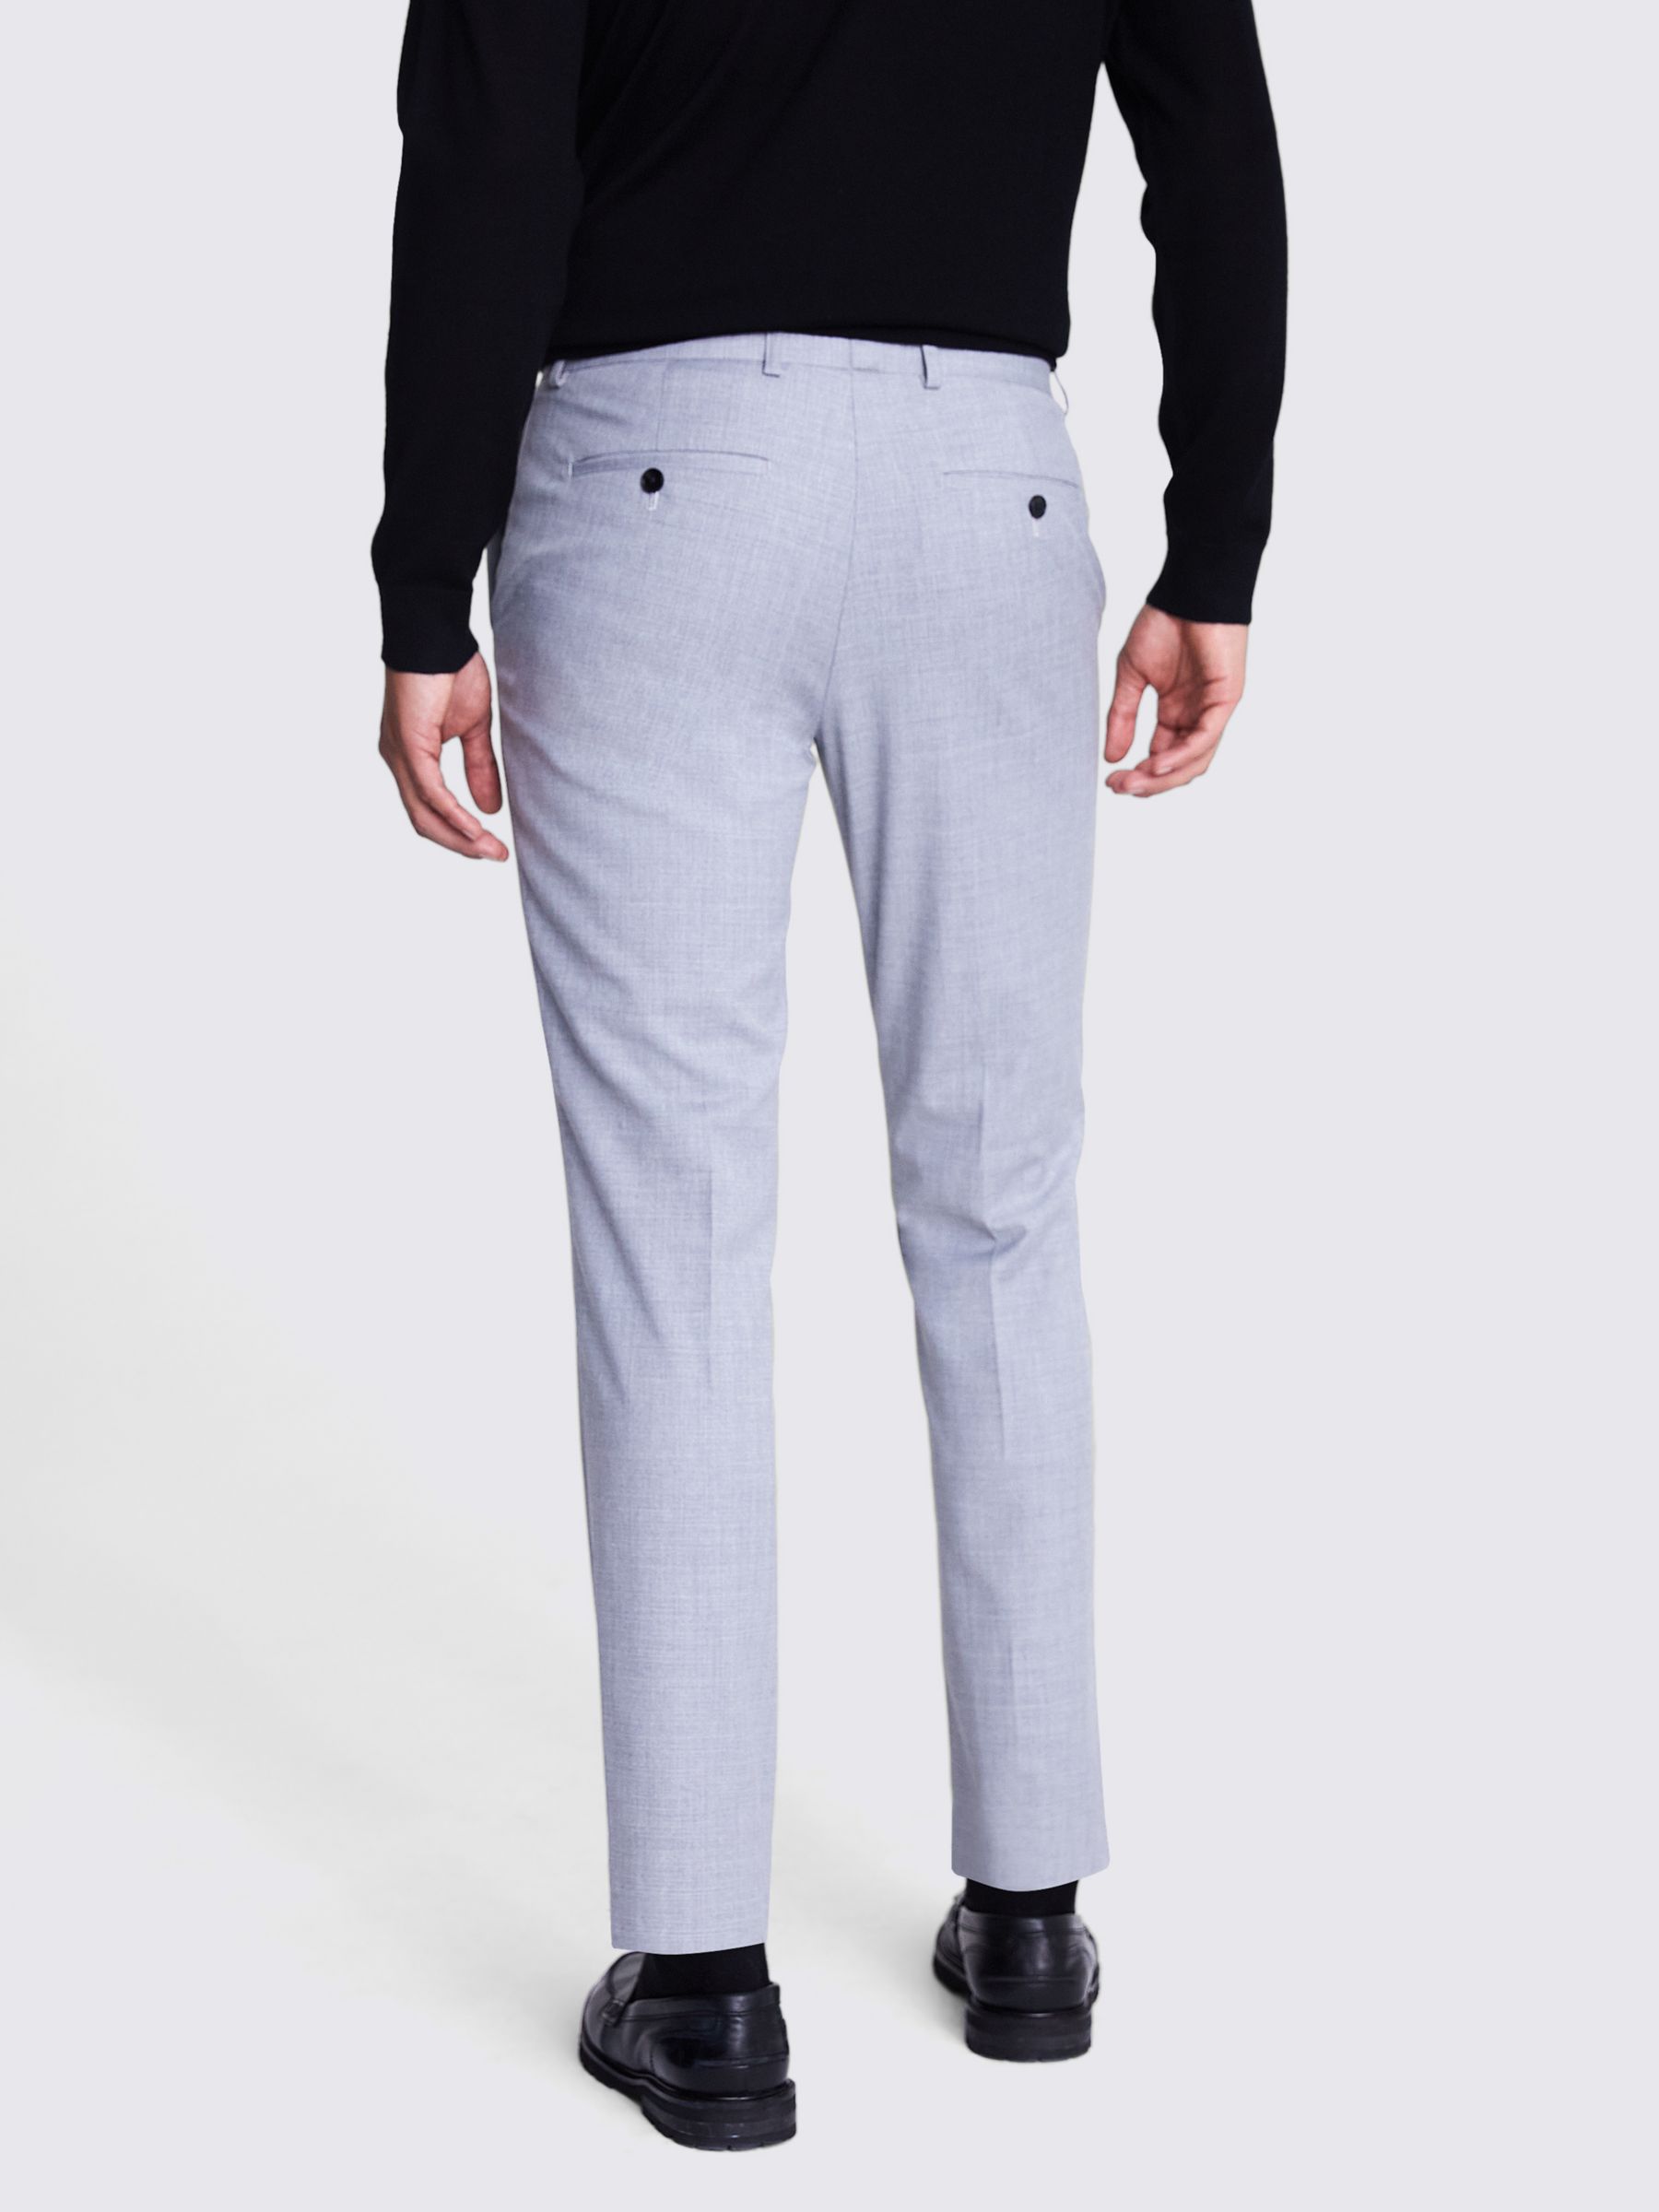 Moss Slim Fit Stretch Trousers, Grey at John Lewis & Partners